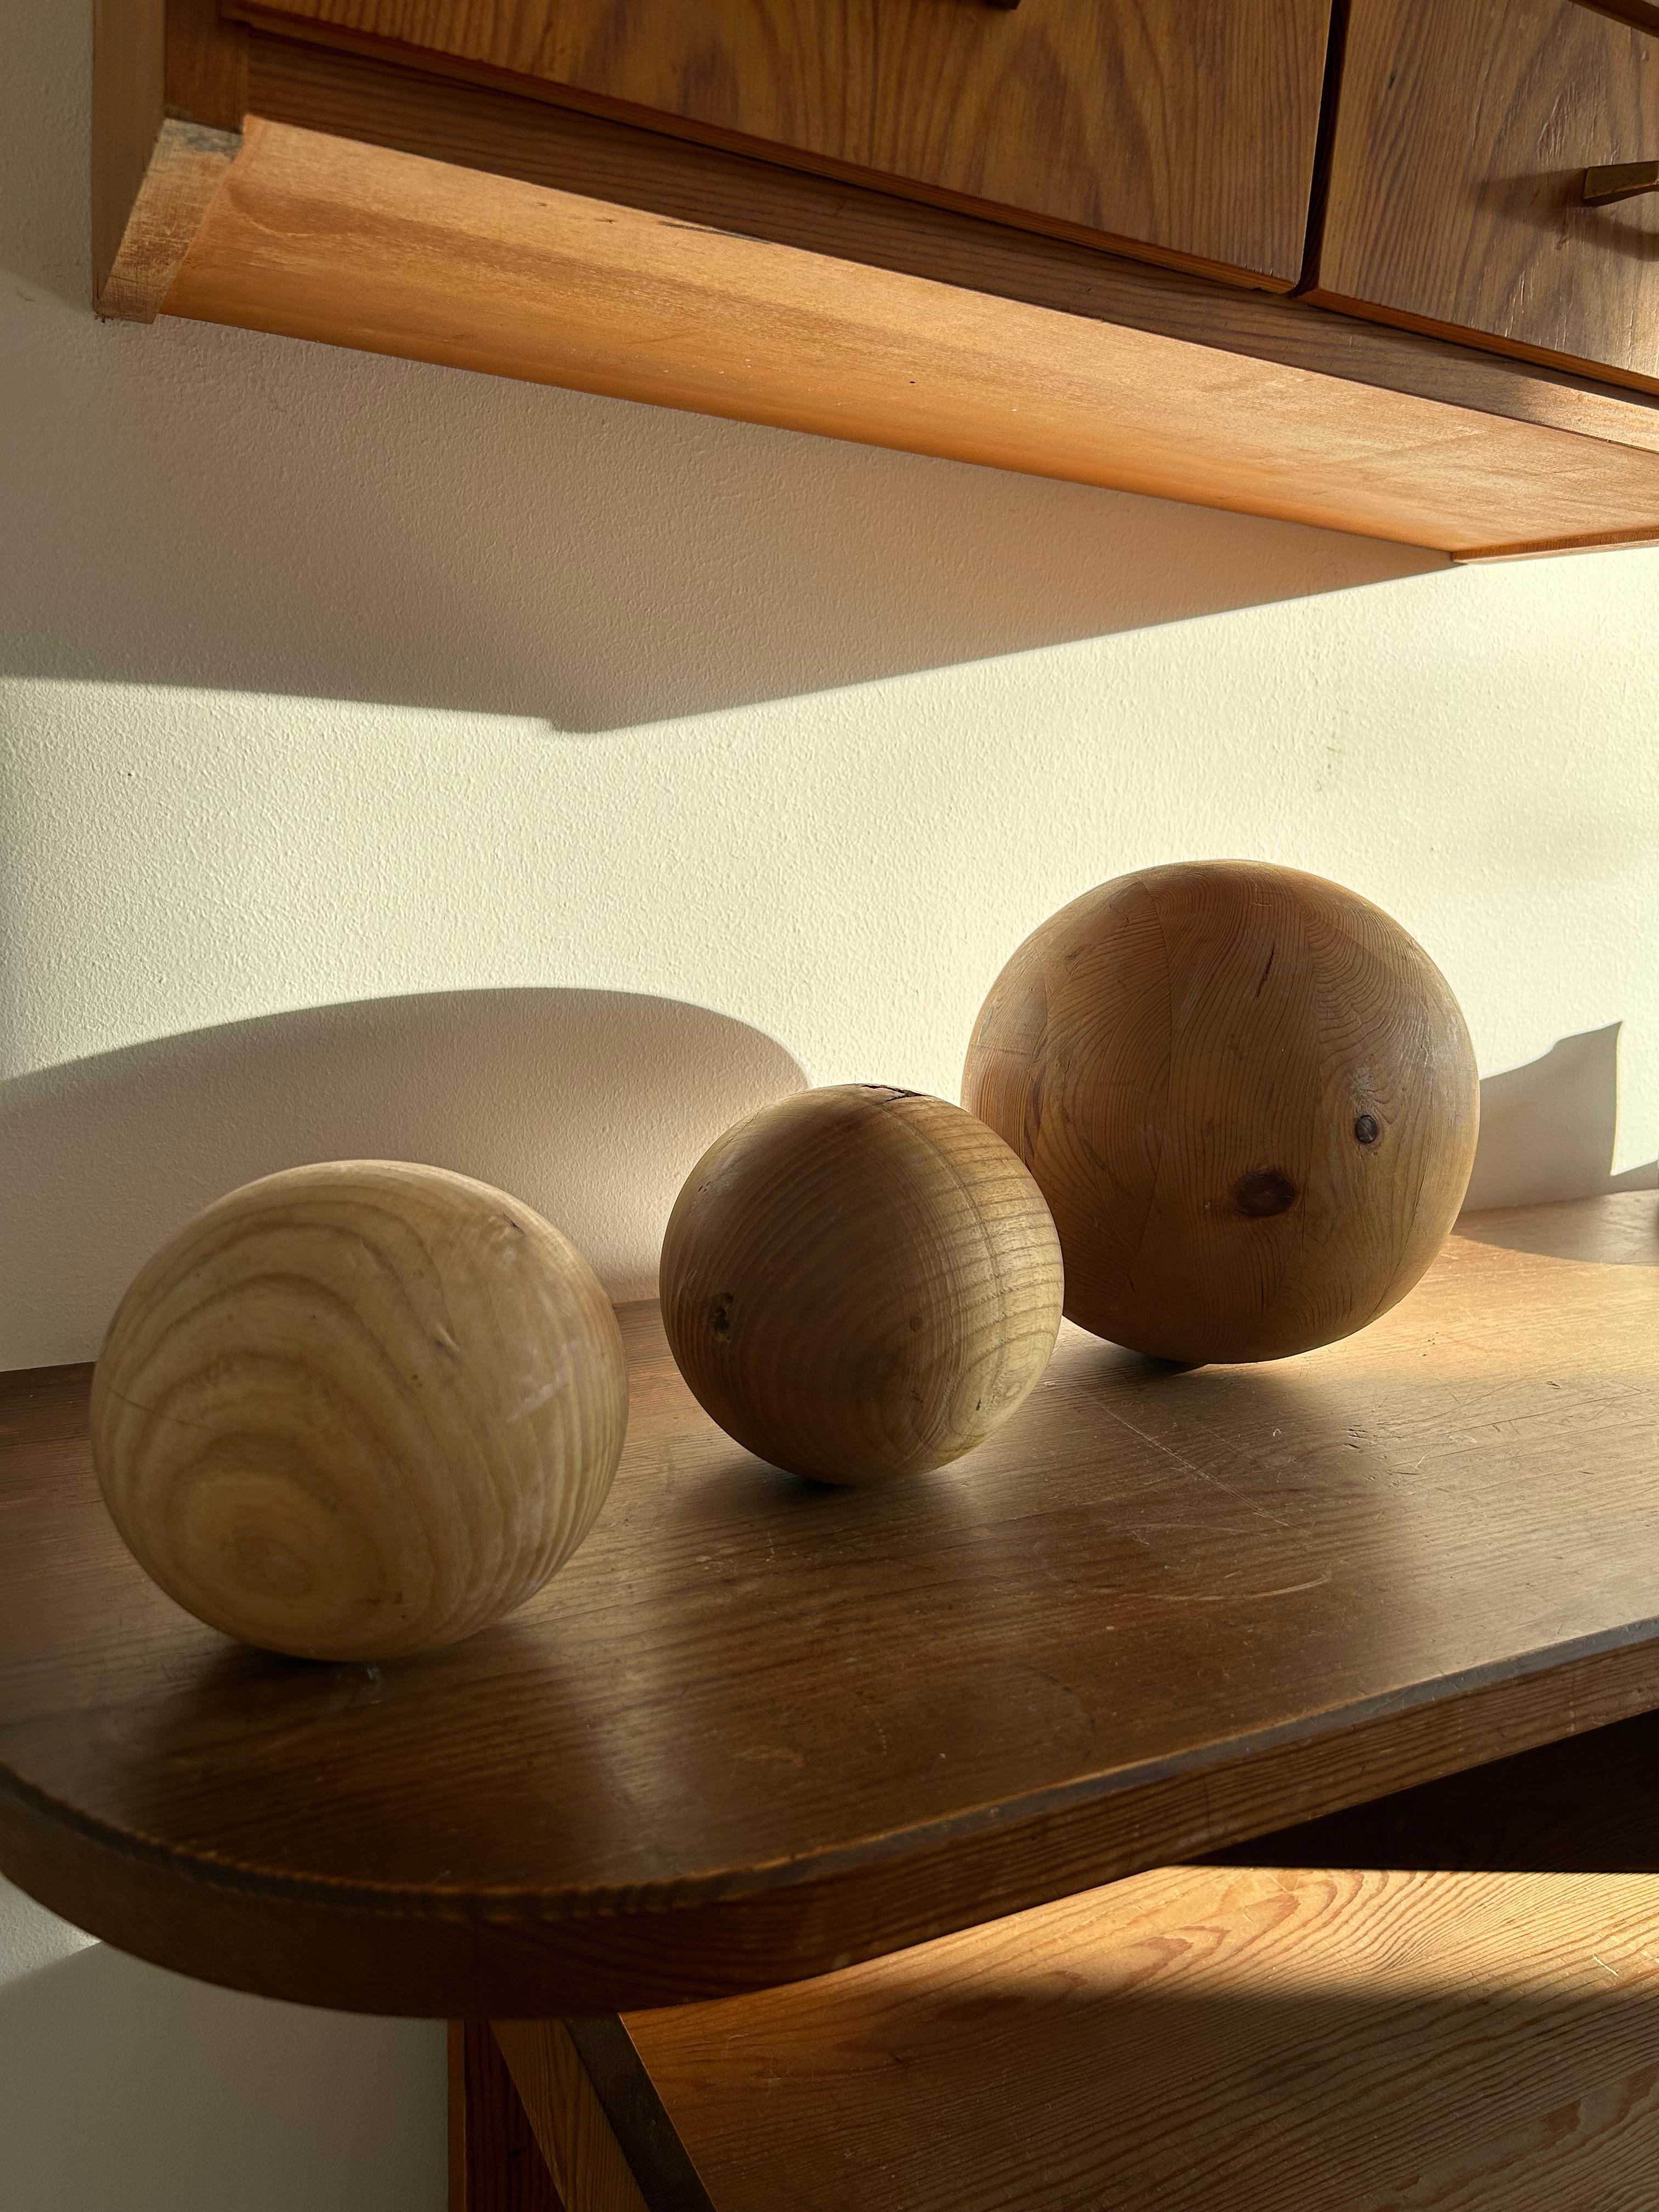 Rare collection of decorative pine balls made in solid pine in Denmark in the 1970s but a skilled wood worker.
The balls are made in solid pine and have been treated with oil.
The balls are in good original condition with signs of use.

The